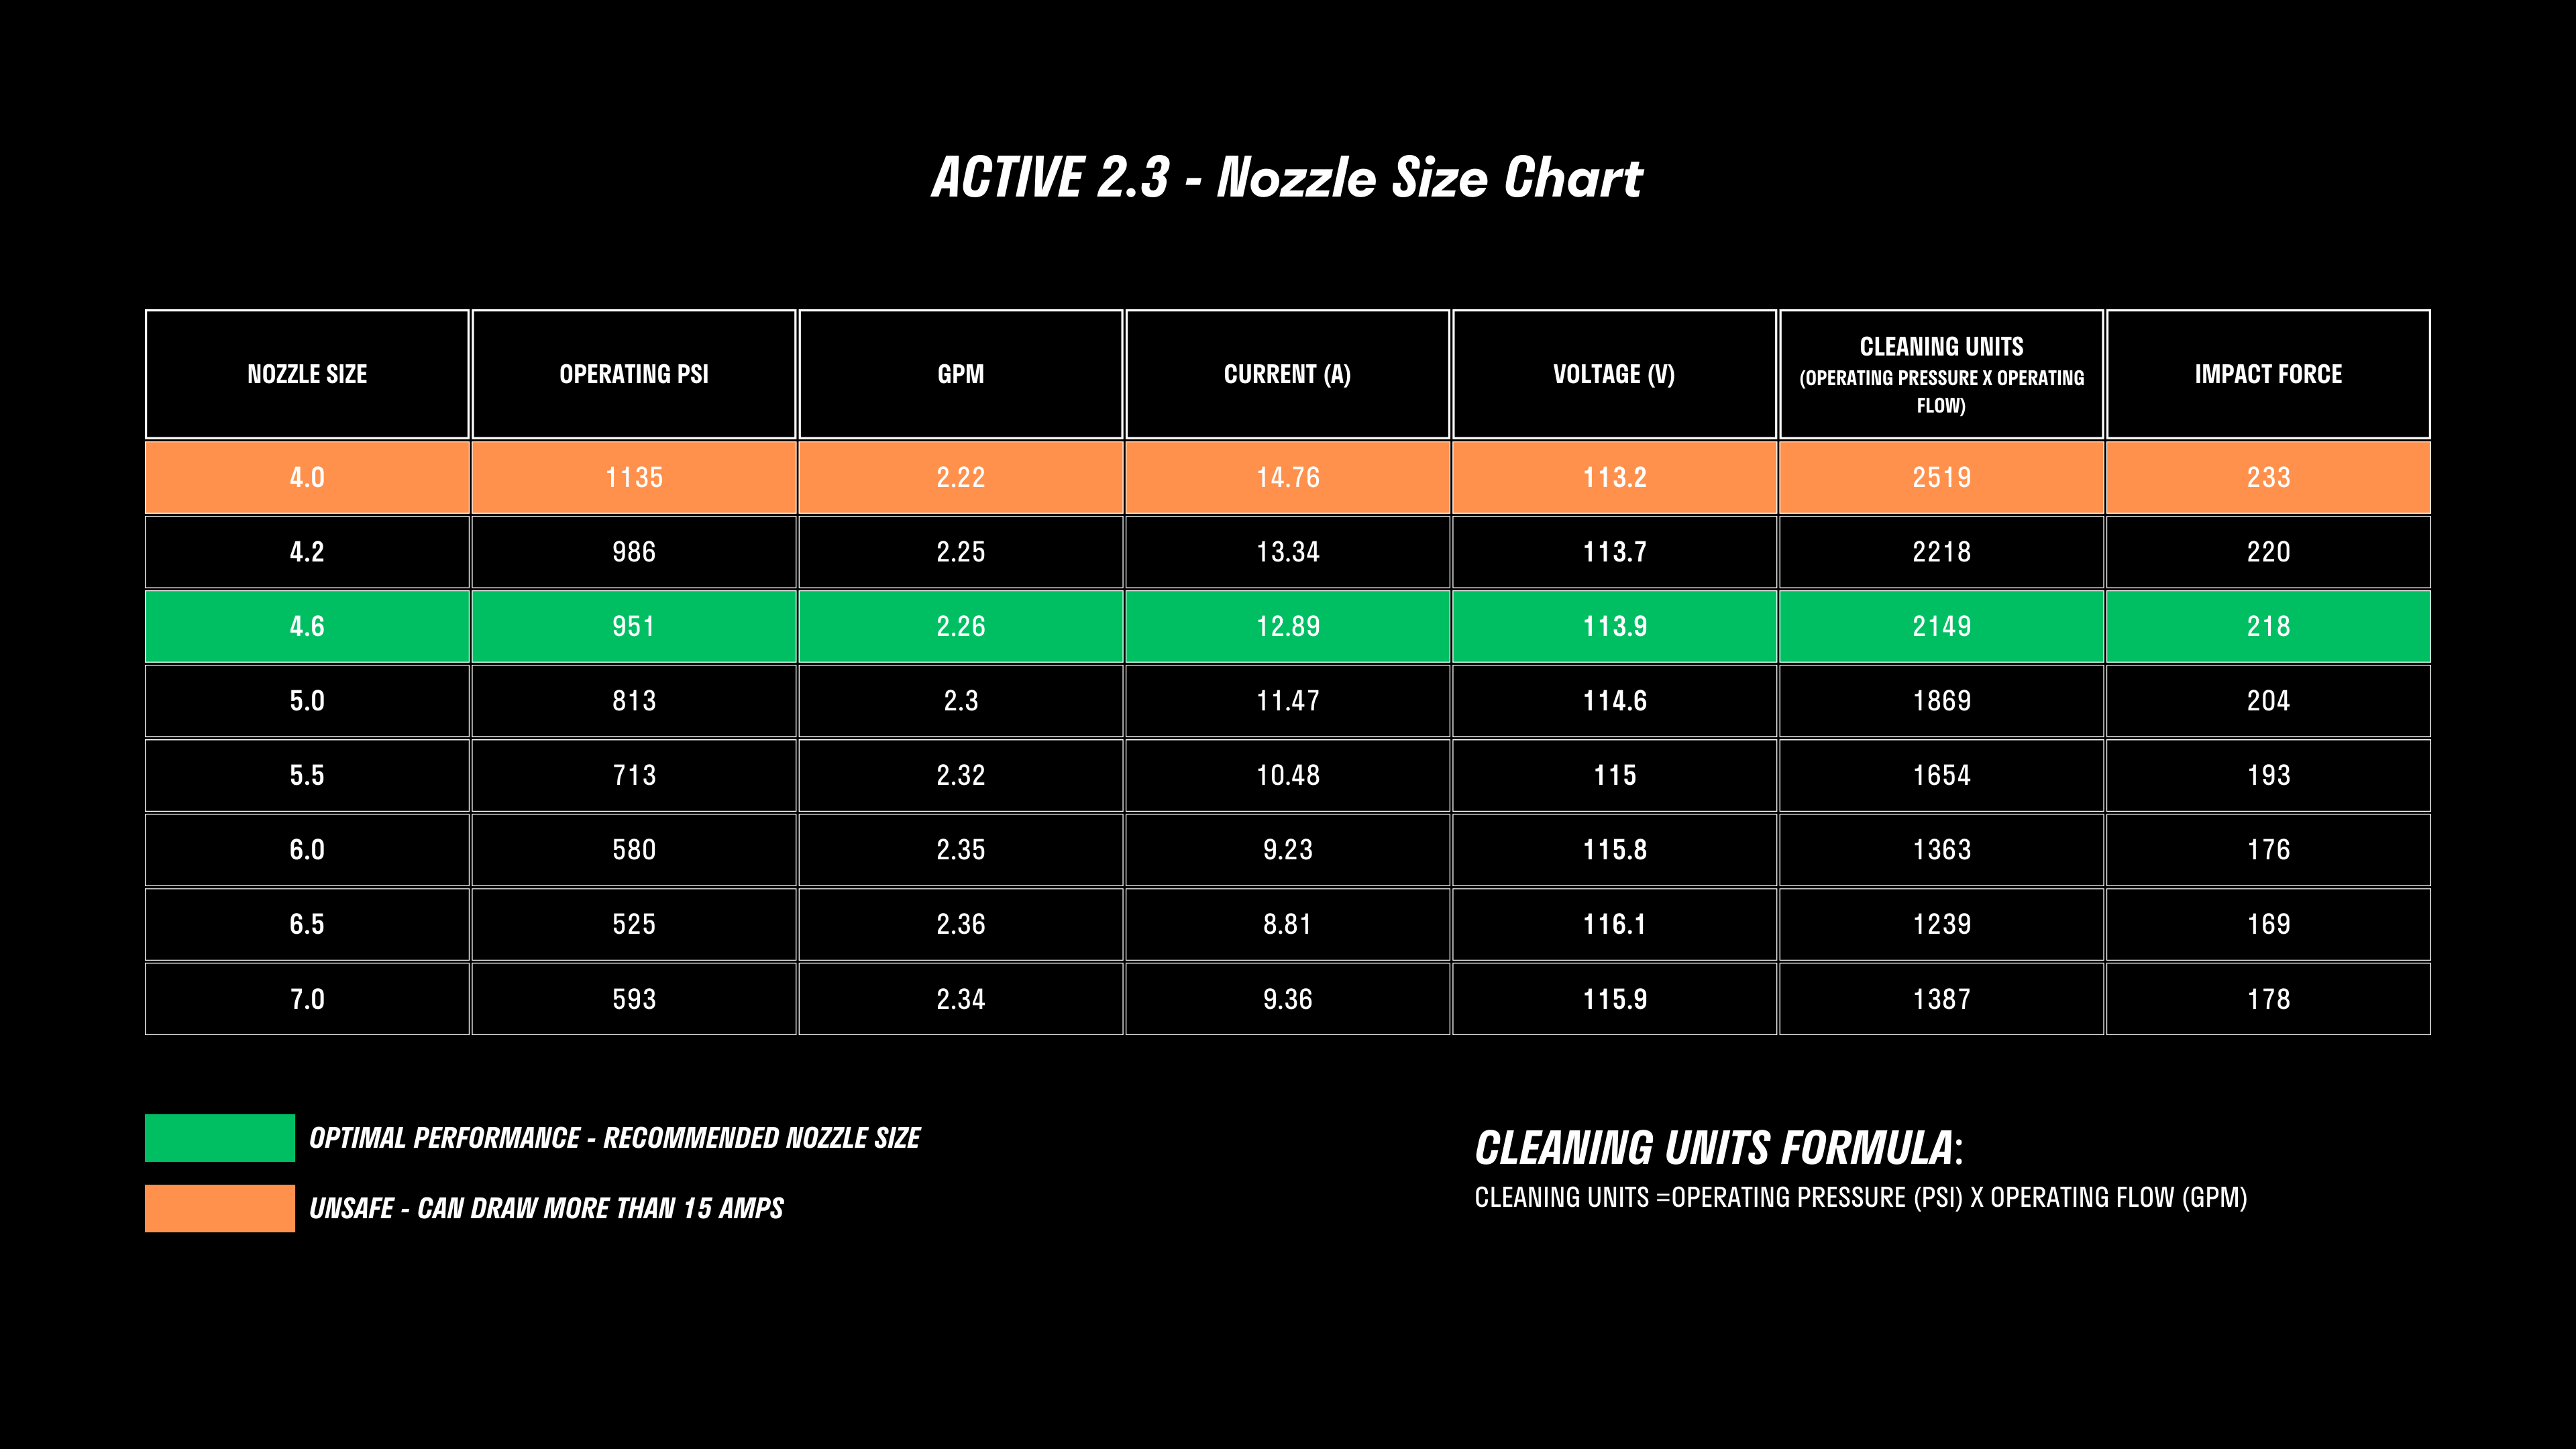 A nozzle size chart titled "Active™ 2.3 Electric Pressure Washer - Nozzle Size Chart" for professional consumers, showing specifications like Operating PSI, 2.3 GPM, Current (A), Voltage (V), Cleaning Units, and Impact Force. Optimal and unsafe pressure washer nozzle sizes are color-coded in green and orange respectively.
